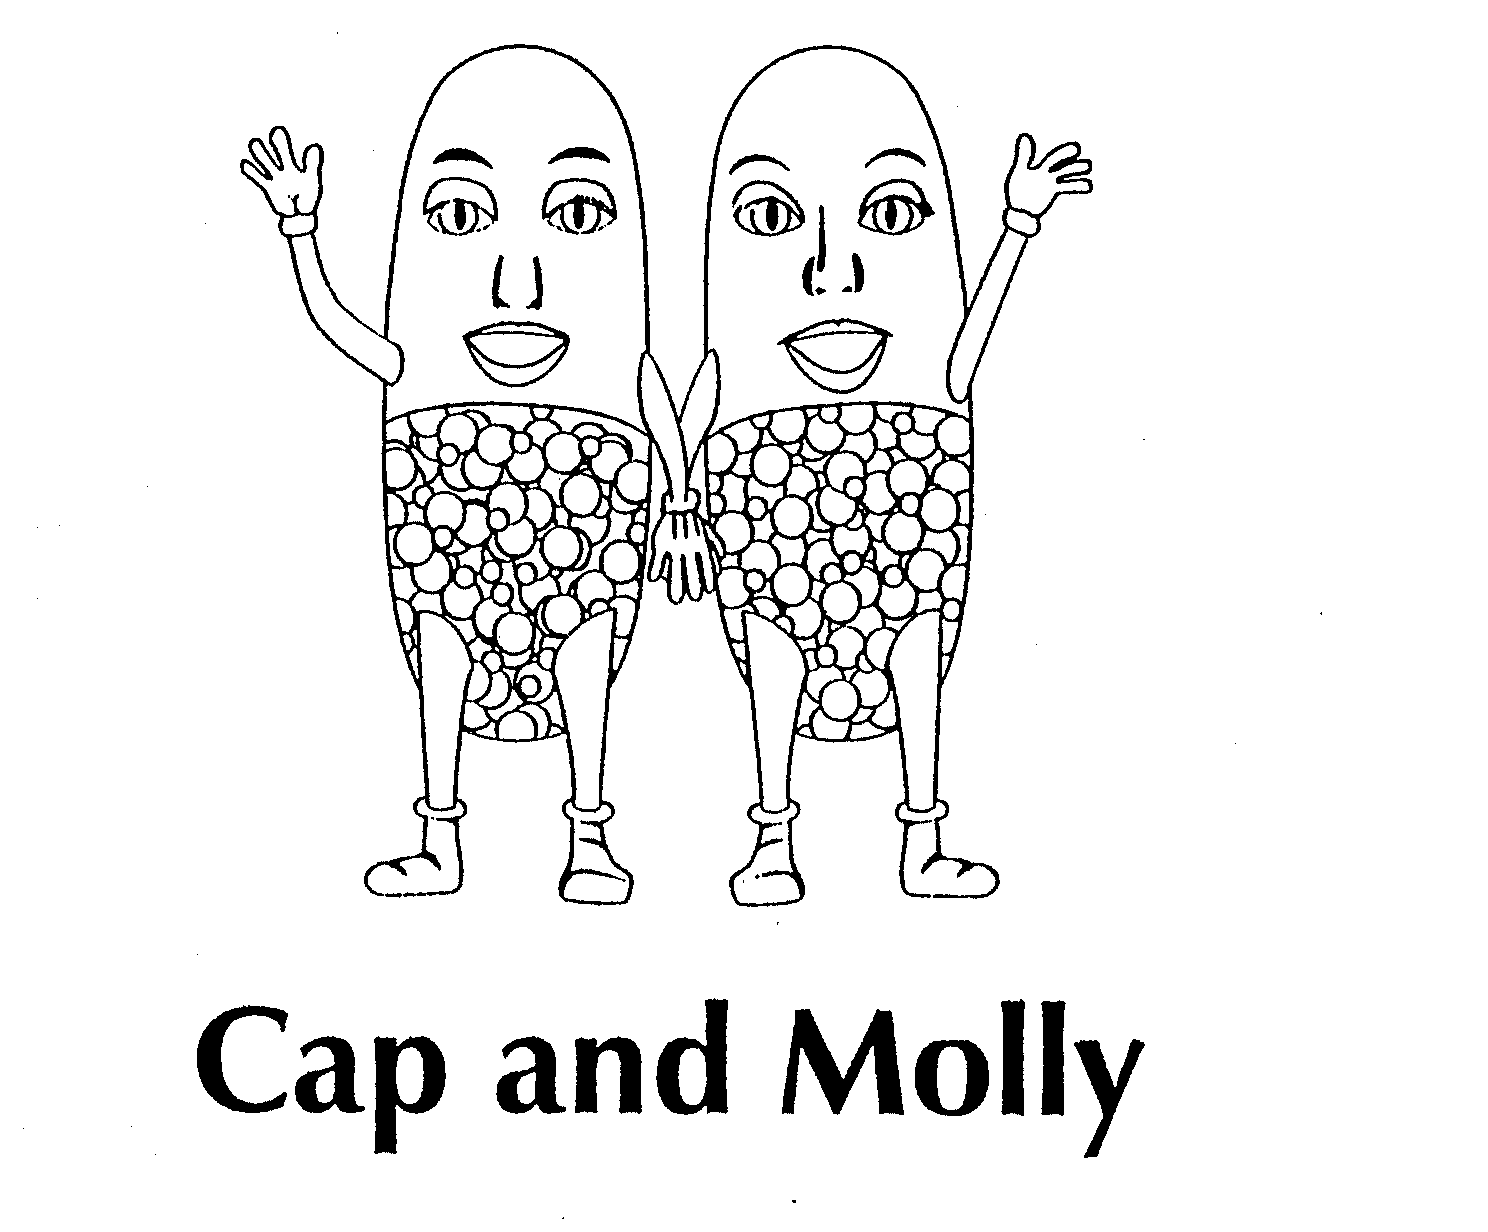 CAP AND MOLLY